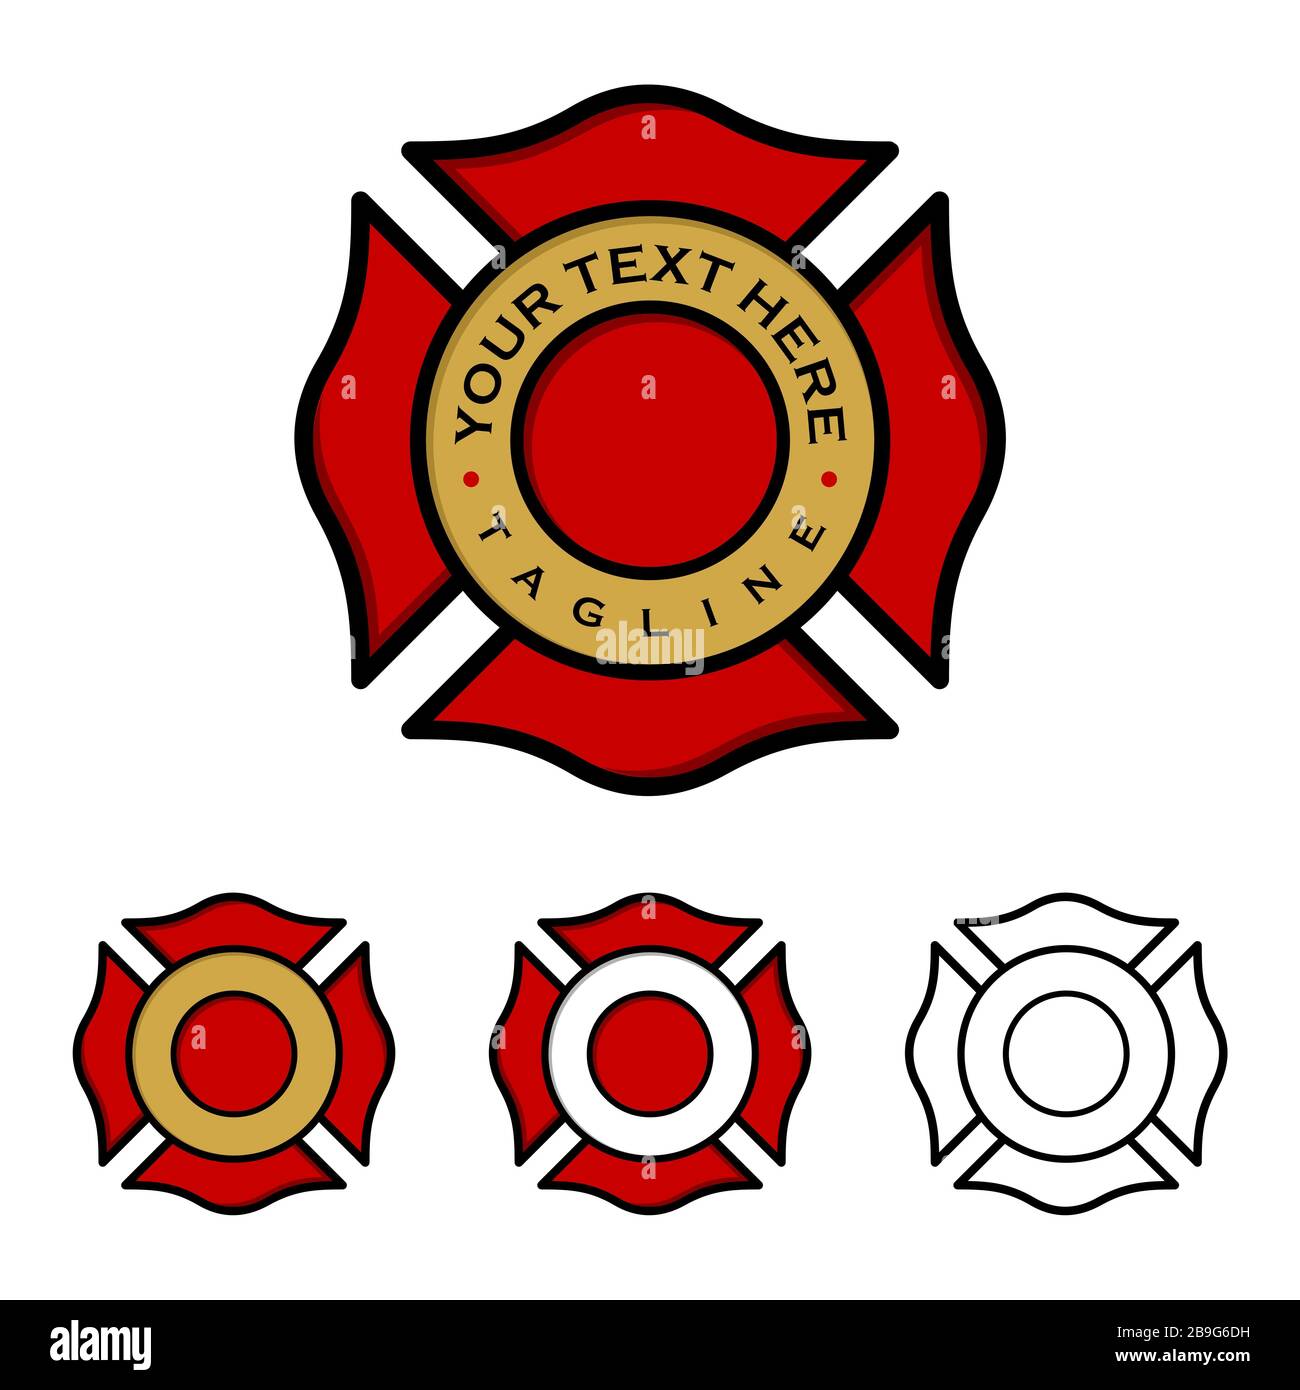 Fire department badge Cut Out Stock Images & Pictures - Alamy